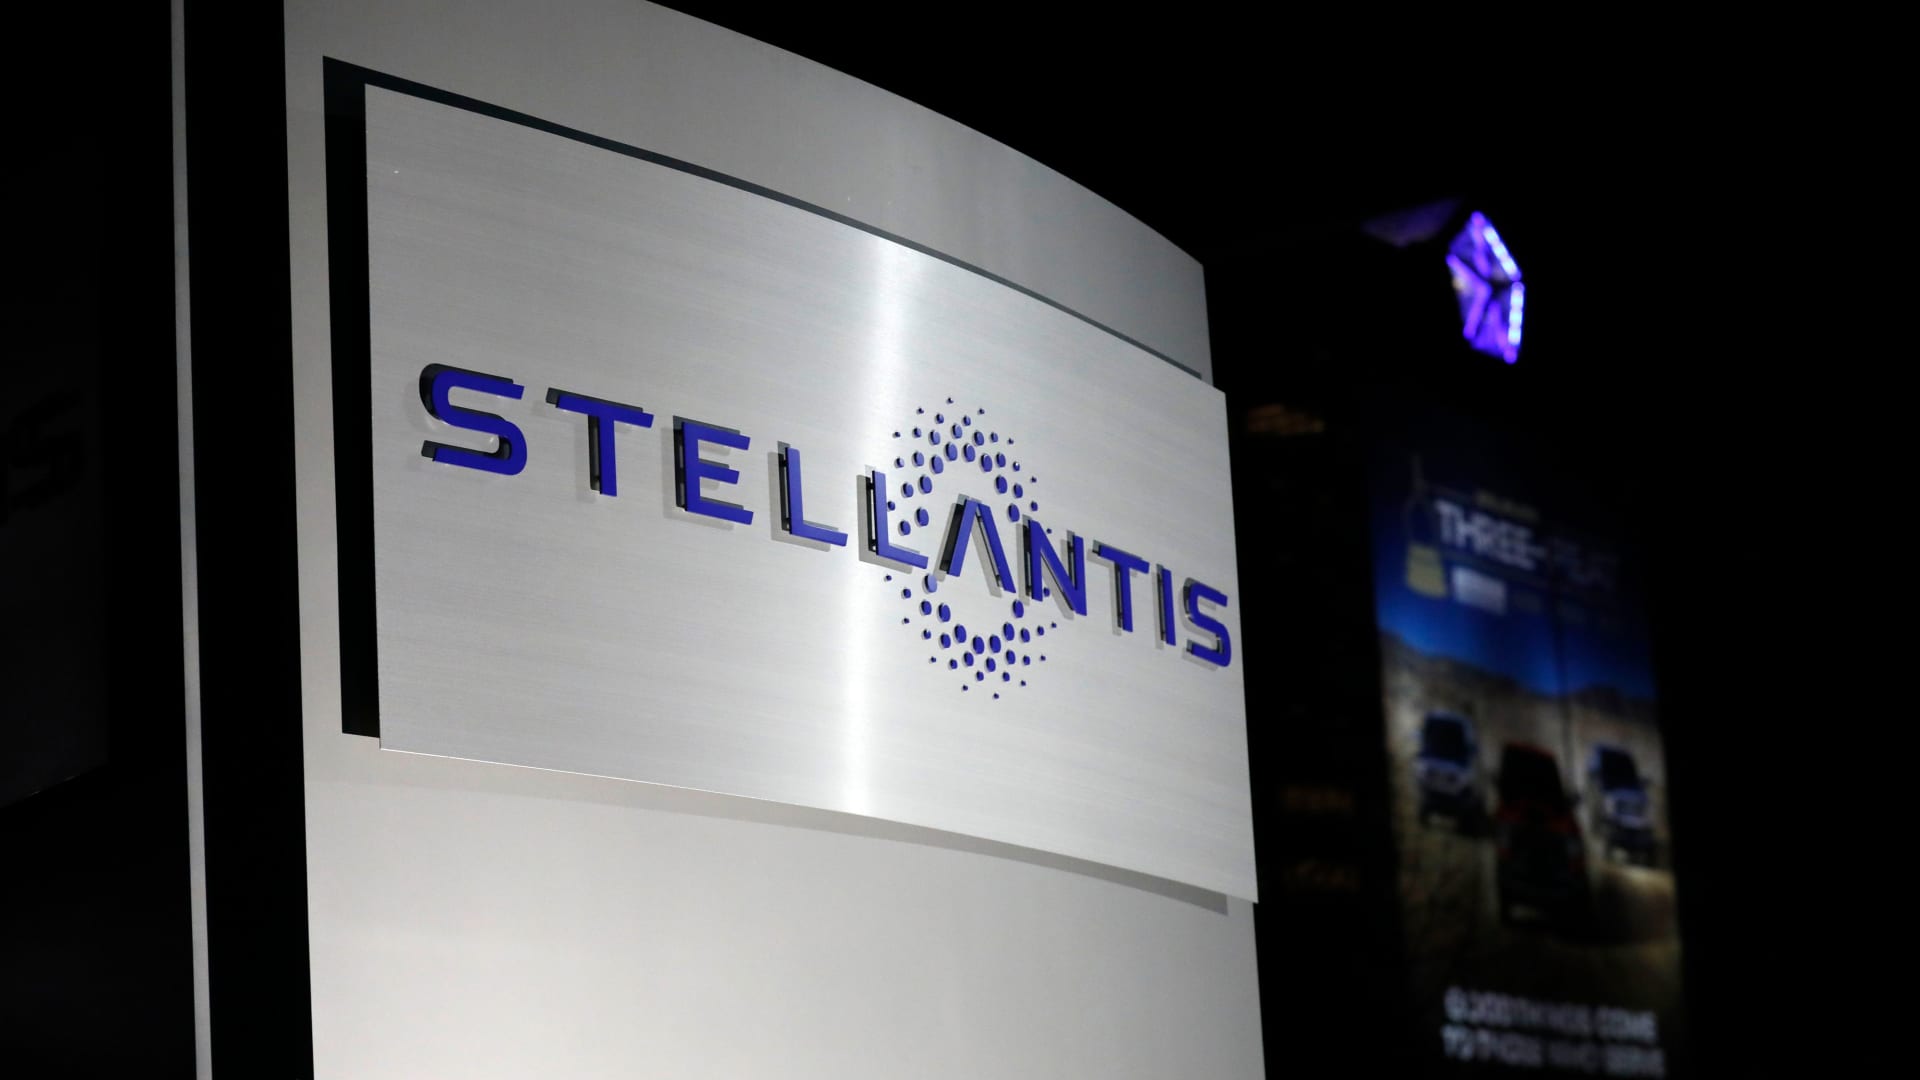 The sign is seen outside of the FCA US LLC Headquarters and Technology Center as it is changed to Stellantis on January 19, 2021 in Auburn Hills, Michigan.